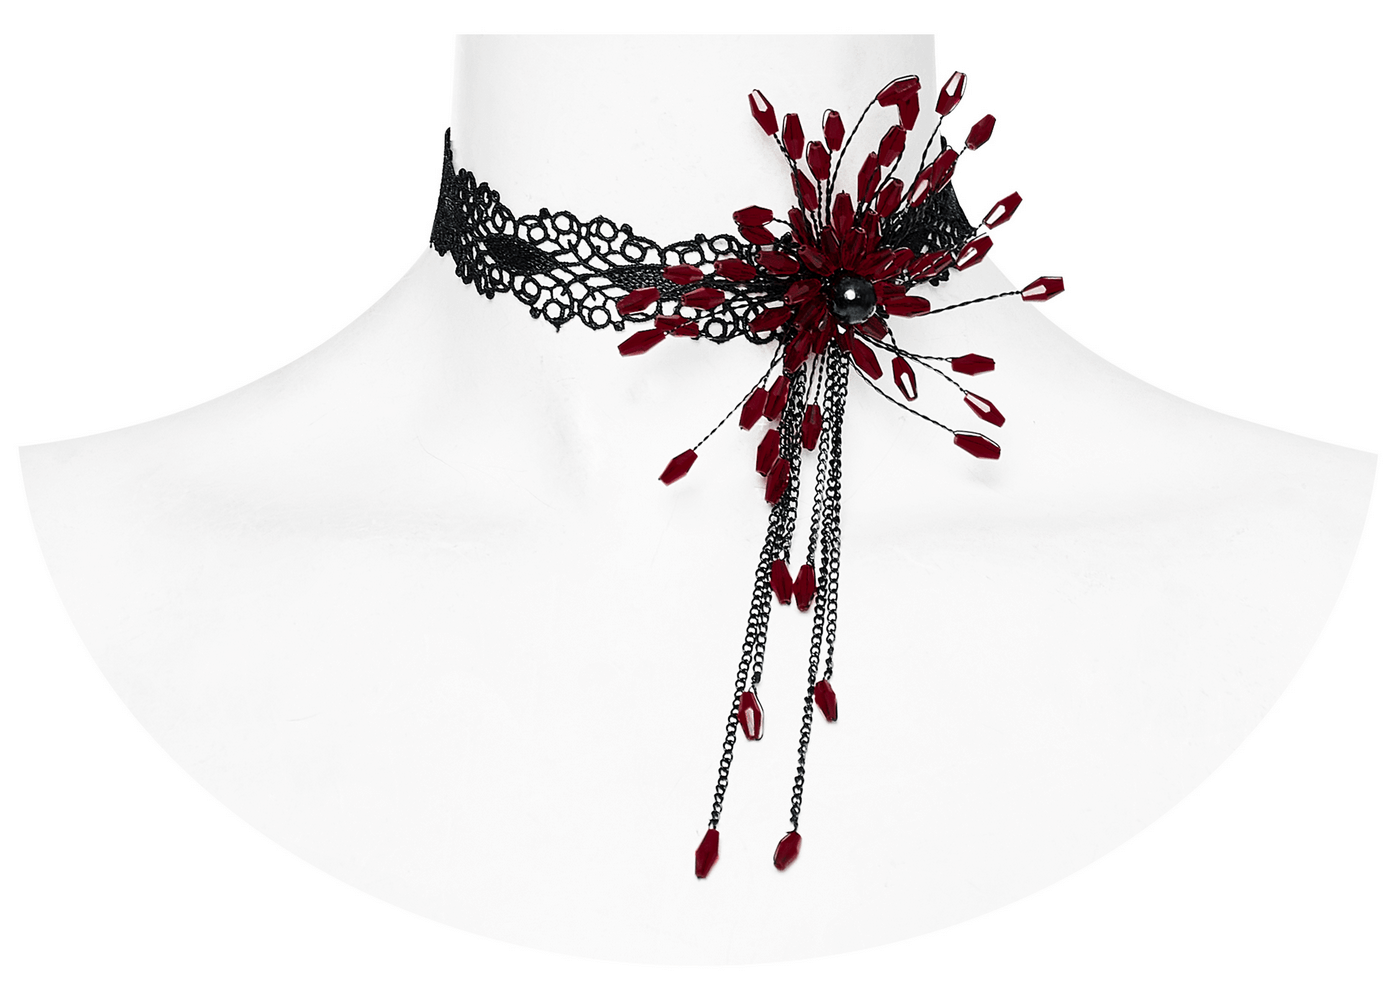 Gothic Edgy Lace Vampire Blood Choker with Flower